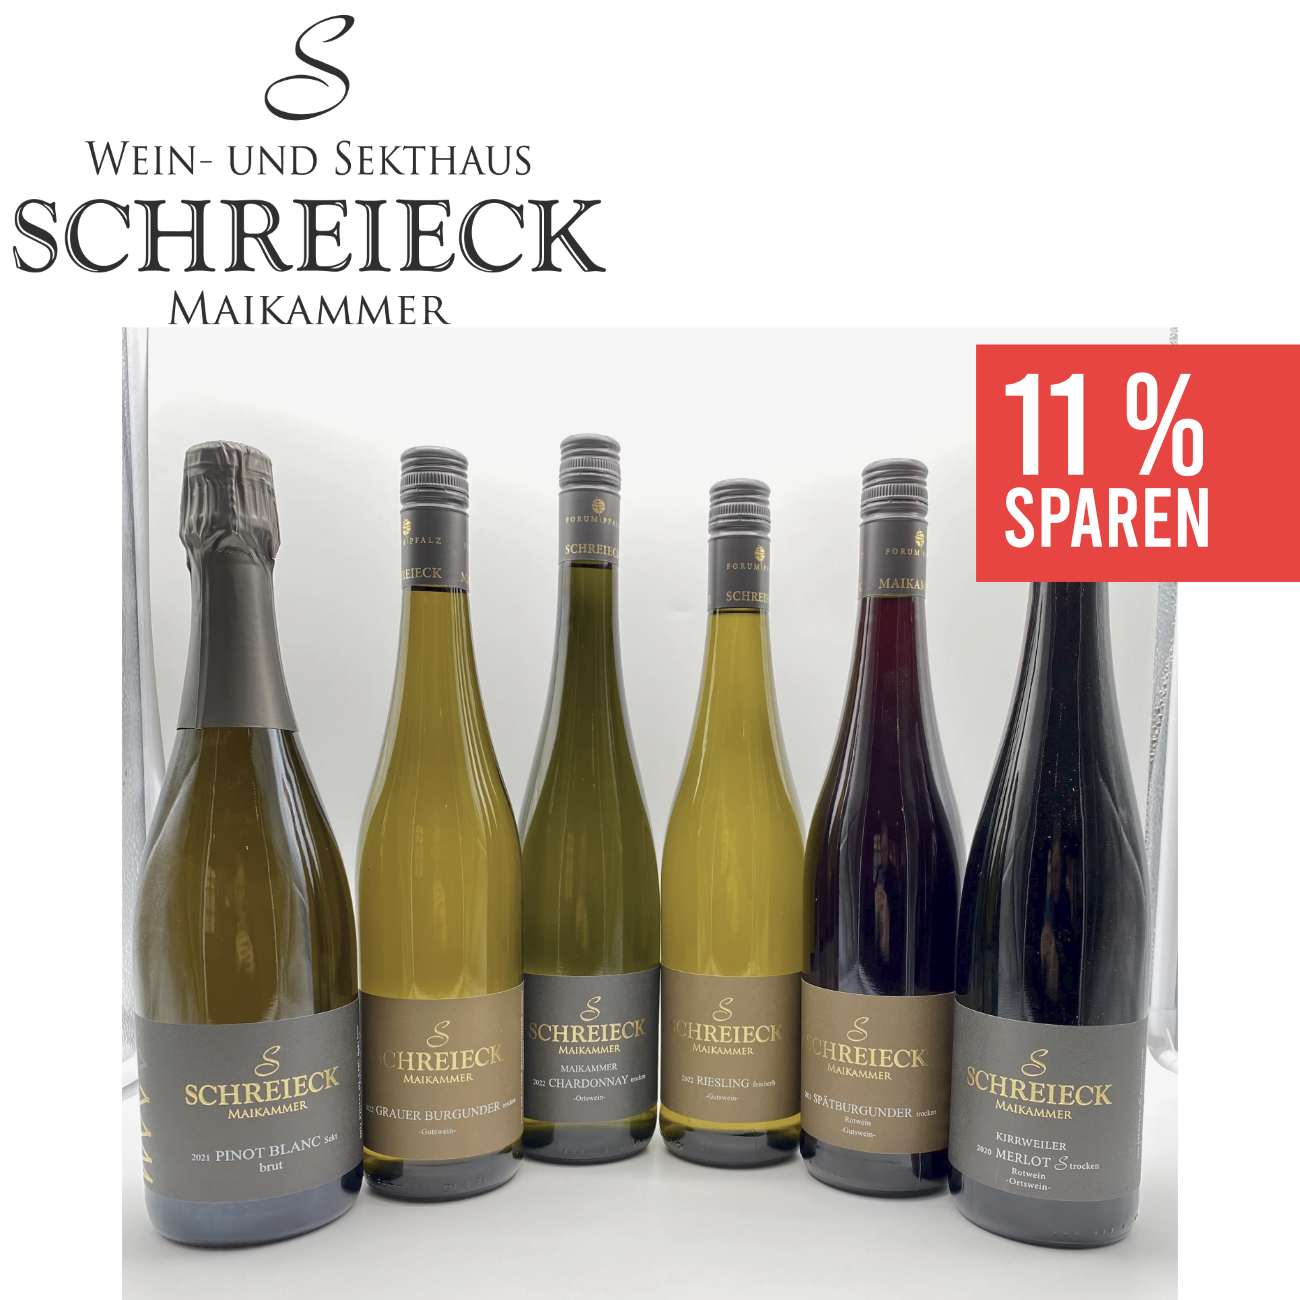 wein.plus Find+Buy: The wines | members our Find+Buy of wein.plus